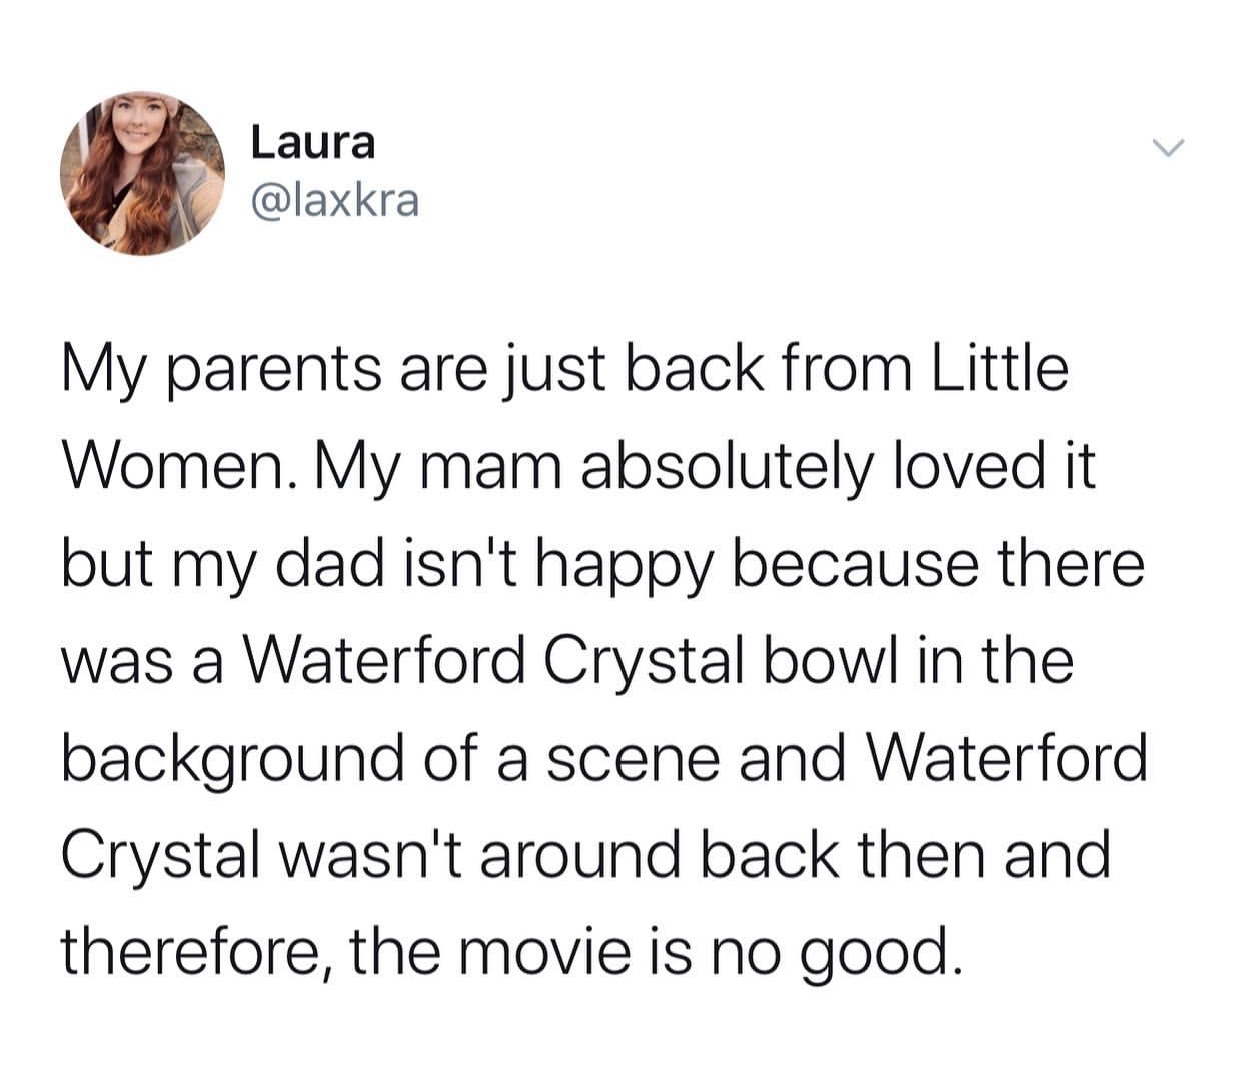 point - Laura My parents are just back from Little Women. My mam absolutely loved it but my dad isn't happy because there was a Waterford Crystal bowl in the background of a scene and Waterford Crystal wasn't around back then and therefore, the movie is n